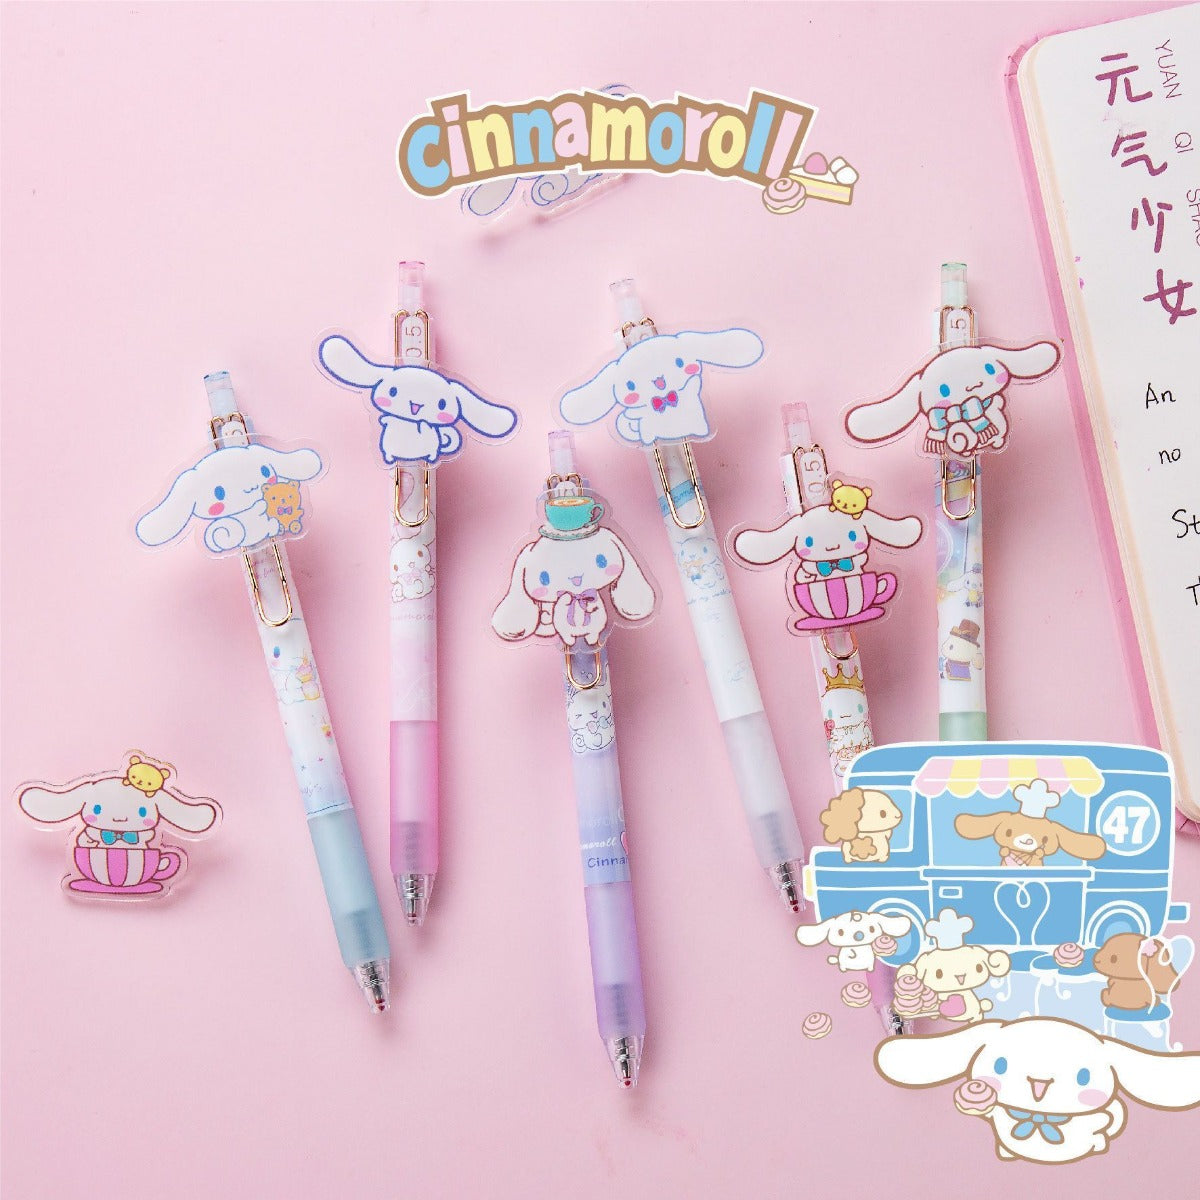 Sanrio Cinnamoroll Quick-Dry Gel Pens Charm 6PC Set Black Ink 0.5MM A Cute Shop - Inspired by You For The Cute Soul 